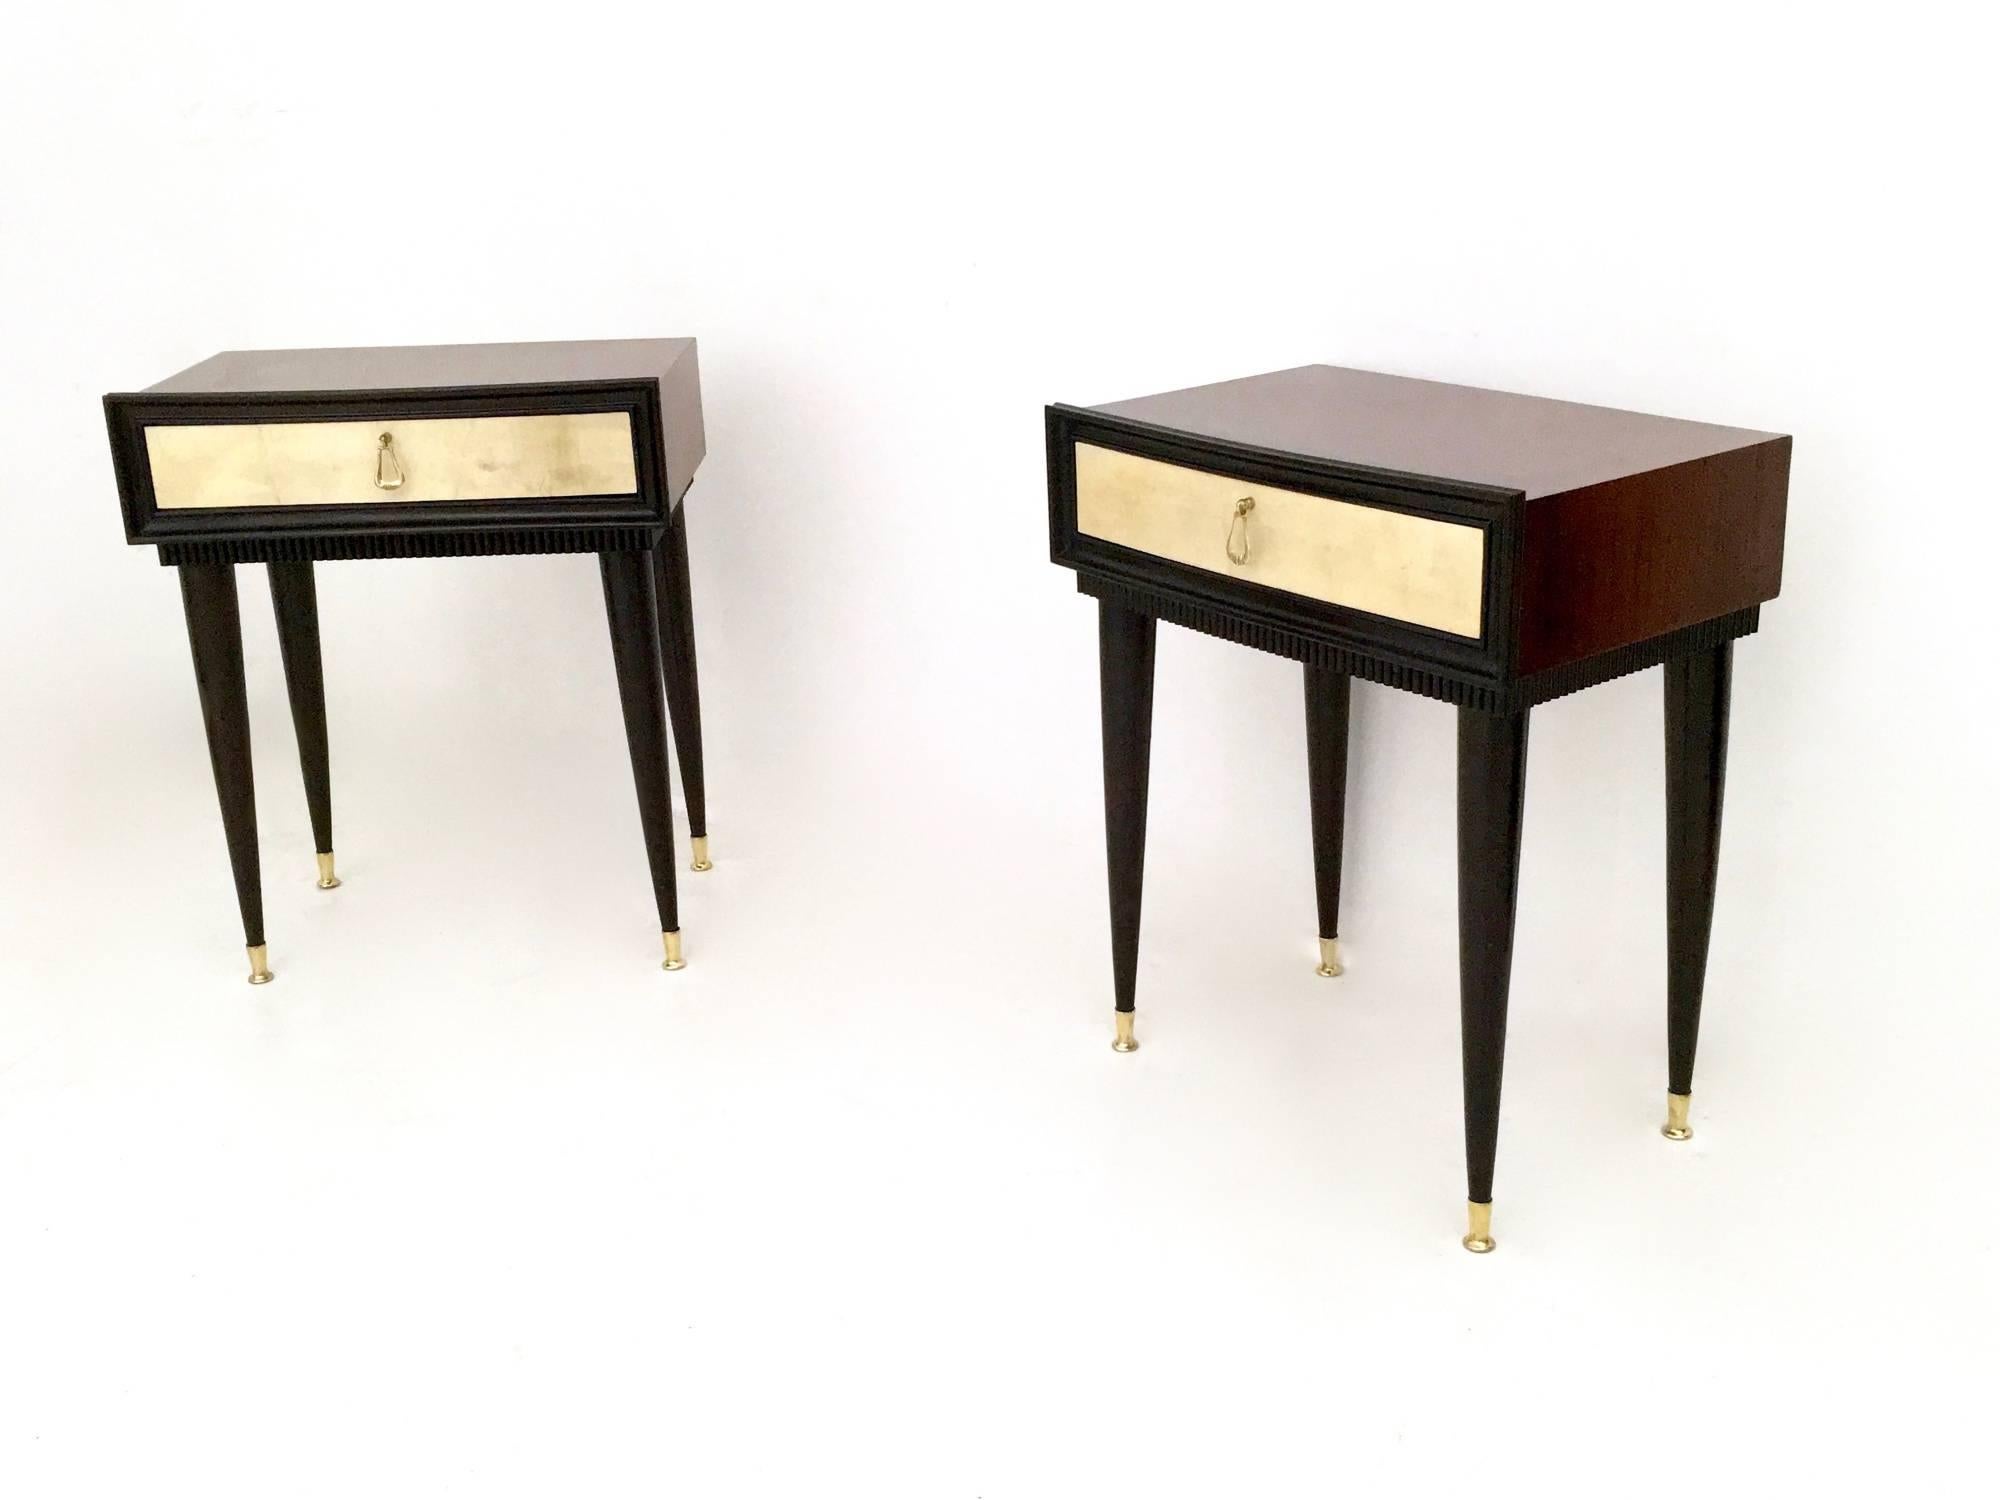 These nightstands are made in wood and ebonized wood. 
They feature parchment drawers and brass handles and feet caps. 
They may show slight traces of use, but they are in excellent original condition. 

Measures: Width 50.5 cm
Depth 33